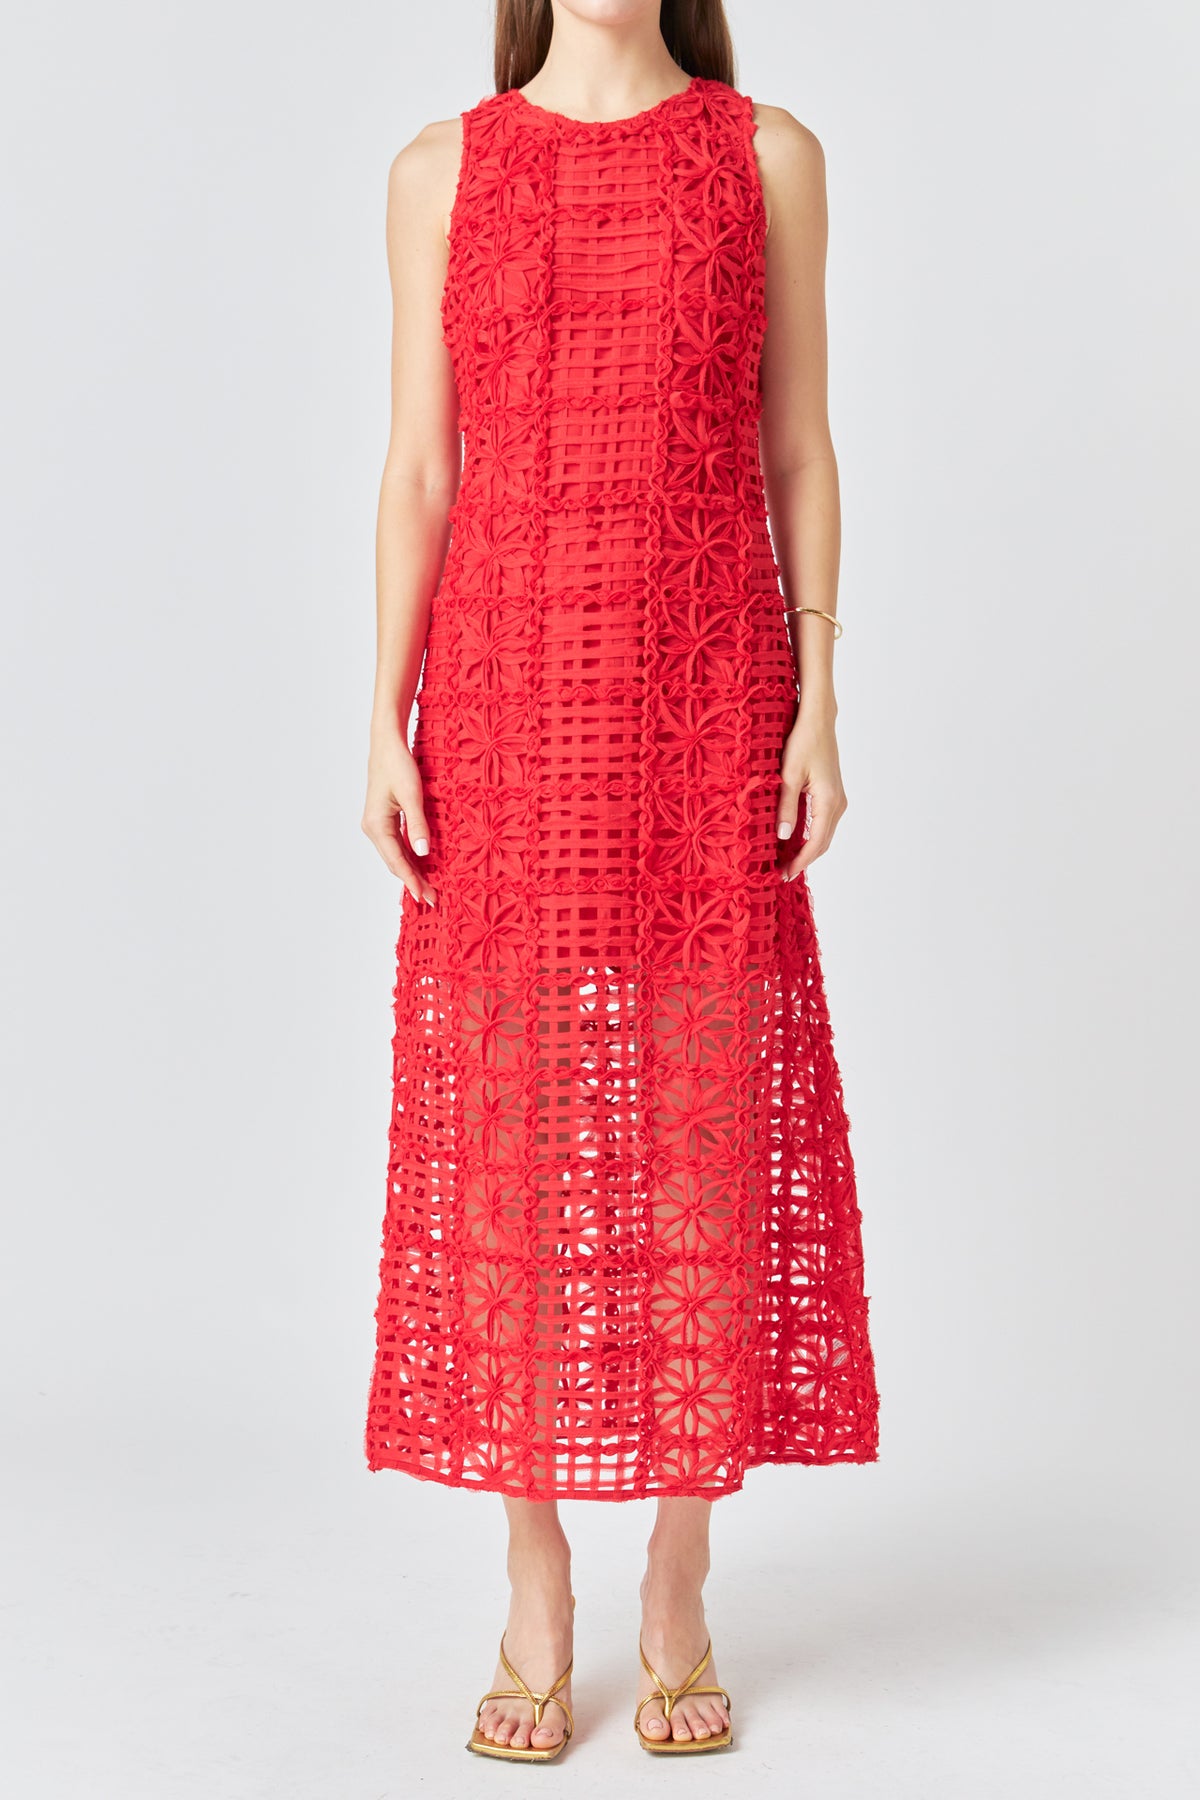 ENDLESS ROSE - Textured Sleeveless Maxi Dress - DRESSES available at Objectrare